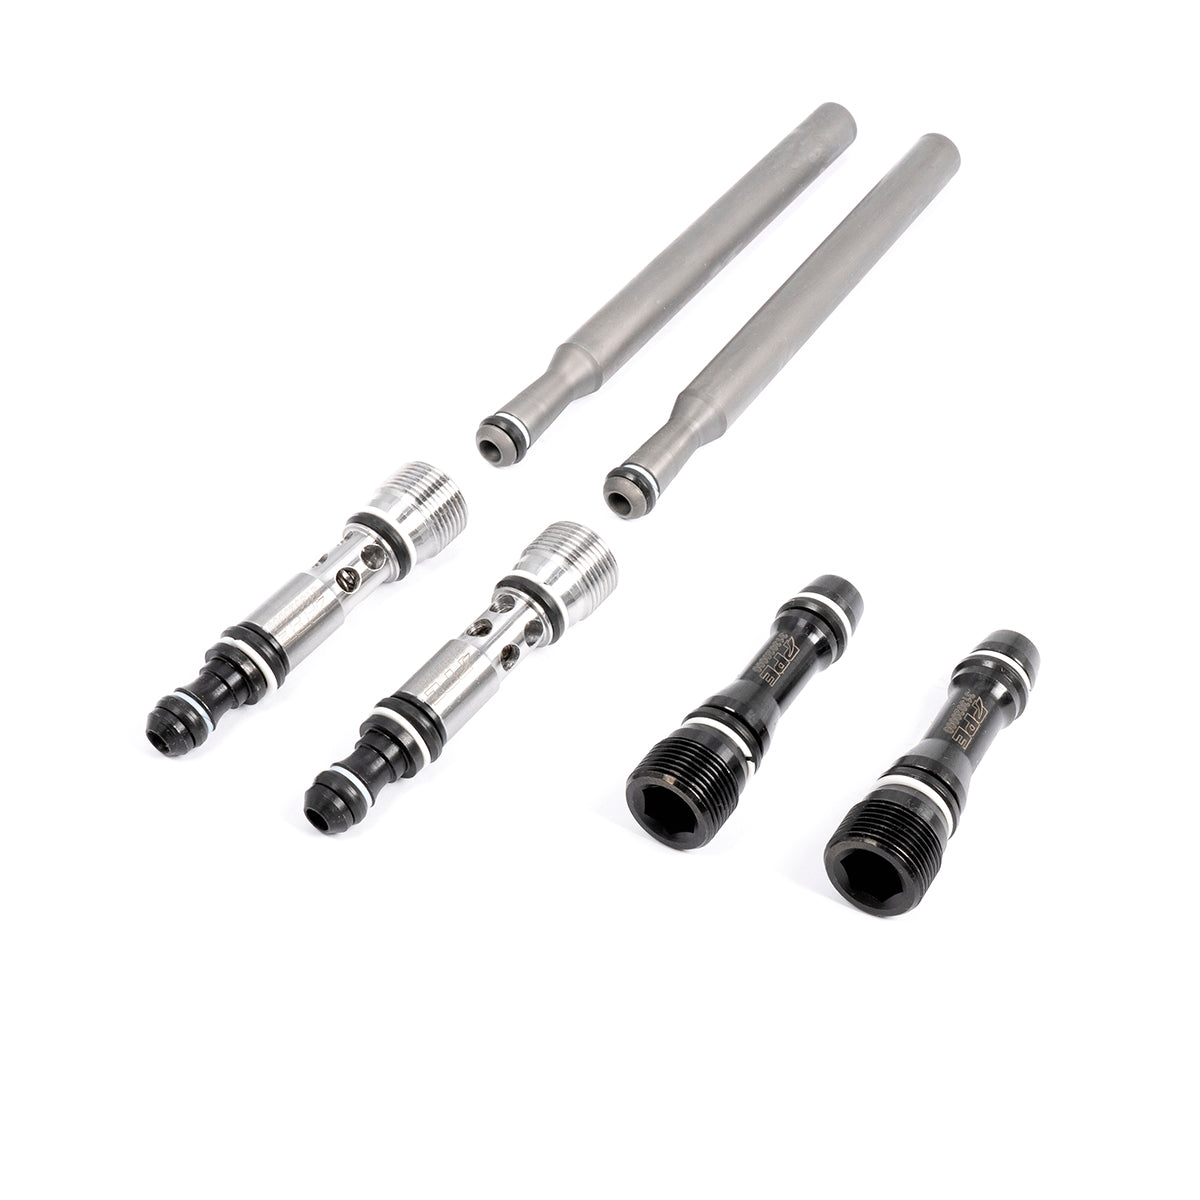 PPE Diesel 2004-2007 Ford Powerstroke 6.0L High Pressure Oil Standpipe and Rail Plug Kit 313020000